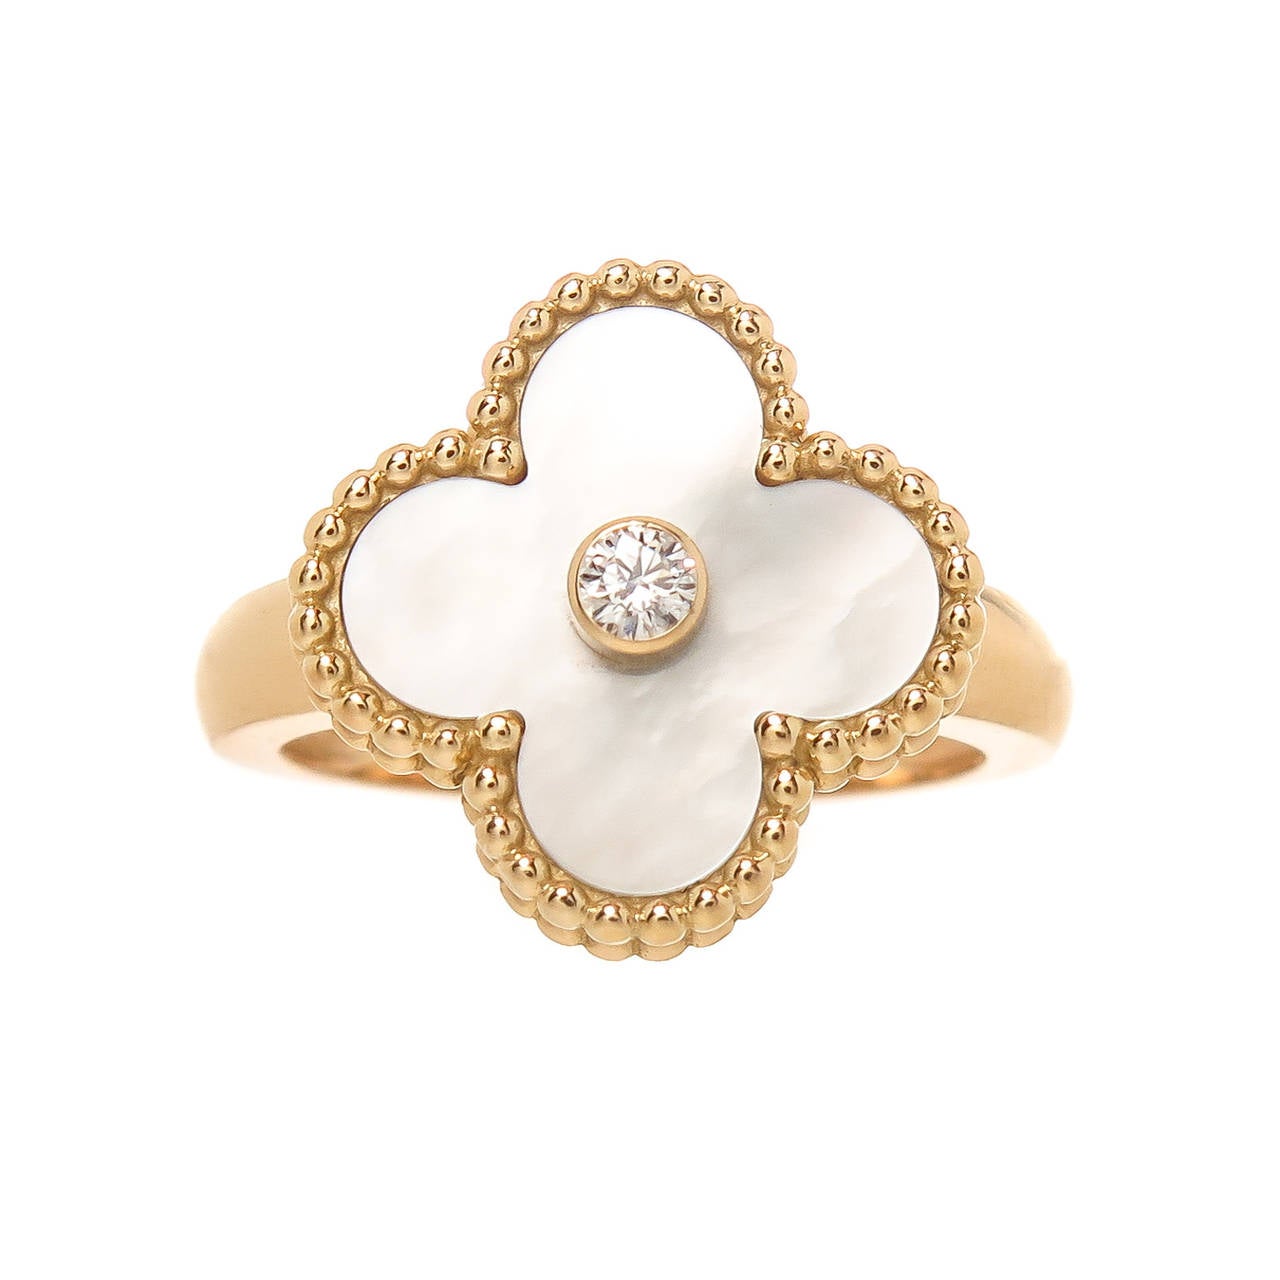 Van Cleef & Arpels 18K Yellow Gold Alhambra Collection ring. Set with White Mother of Pearl and Centrally set with a .05 carat round Brilliant Diamond. Signed and Numbered and having French Control stamps, Finger size = 5 3/4